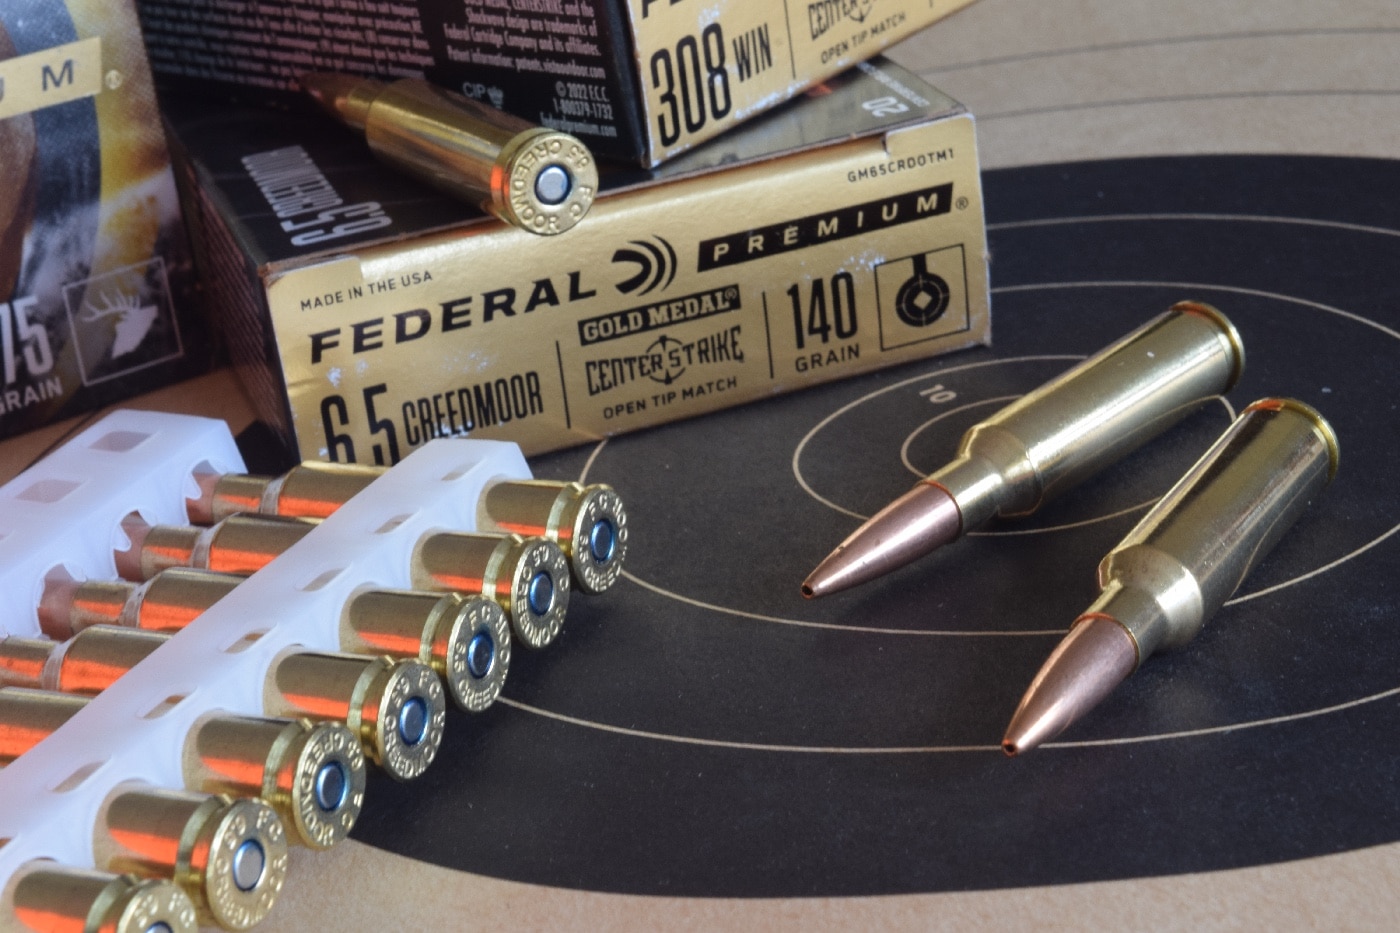 In this photograph we see the author's target along with Federal Premium Ammunition loads for the .308 Winchester and 6.5mm Creedmoor. Both ammo loads would be good for whitetail deer hunting, mule deer or even hog hunts. A soft-point bullet, also known as a soft-nosed bullet, is a jacketed expanding bullet with a soft metal core enclosed by a stronger metal jacket left open at the forward tip. A hollow-point bullet is a type of expanding bullet which expands on impact with a soft target, transferring more or all of the projectile's energy into the target over a shorter distance.